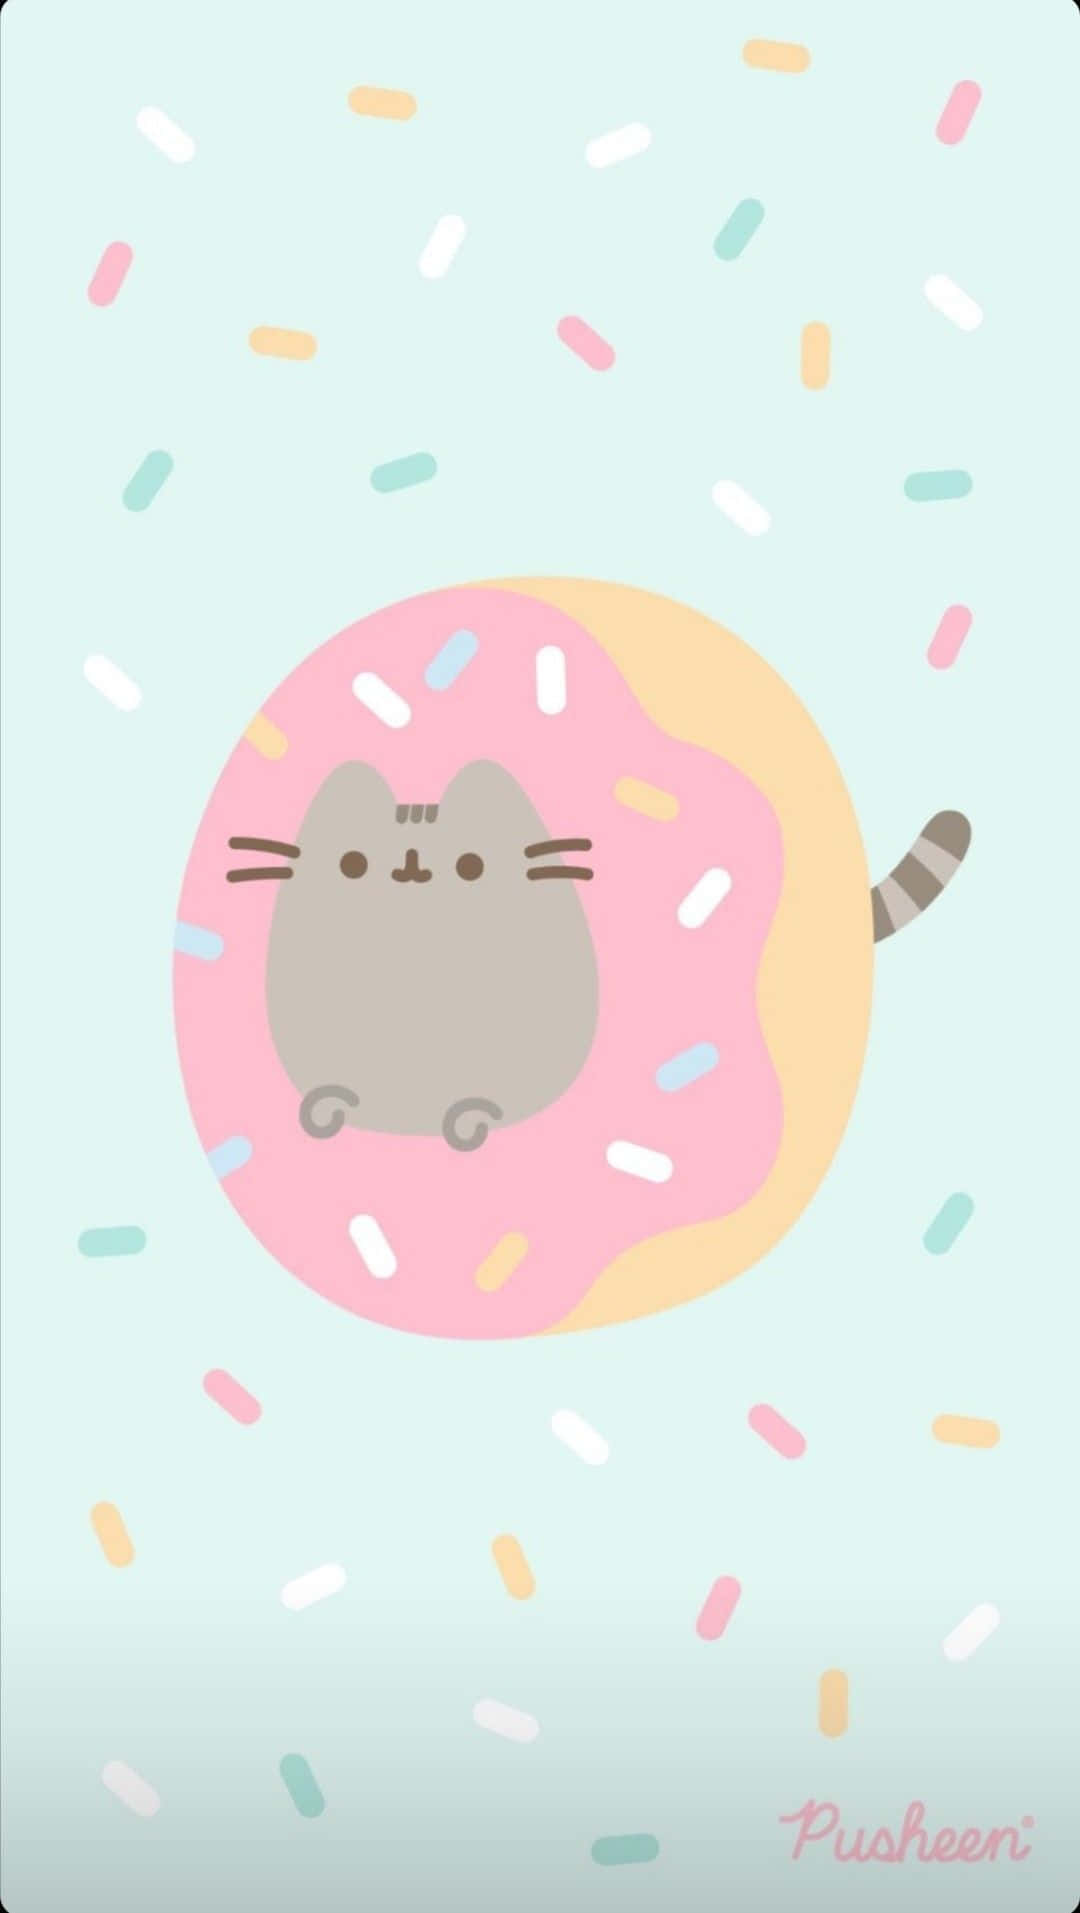 A Cute Pusheen Peeking Out from the Couch Wallpaper